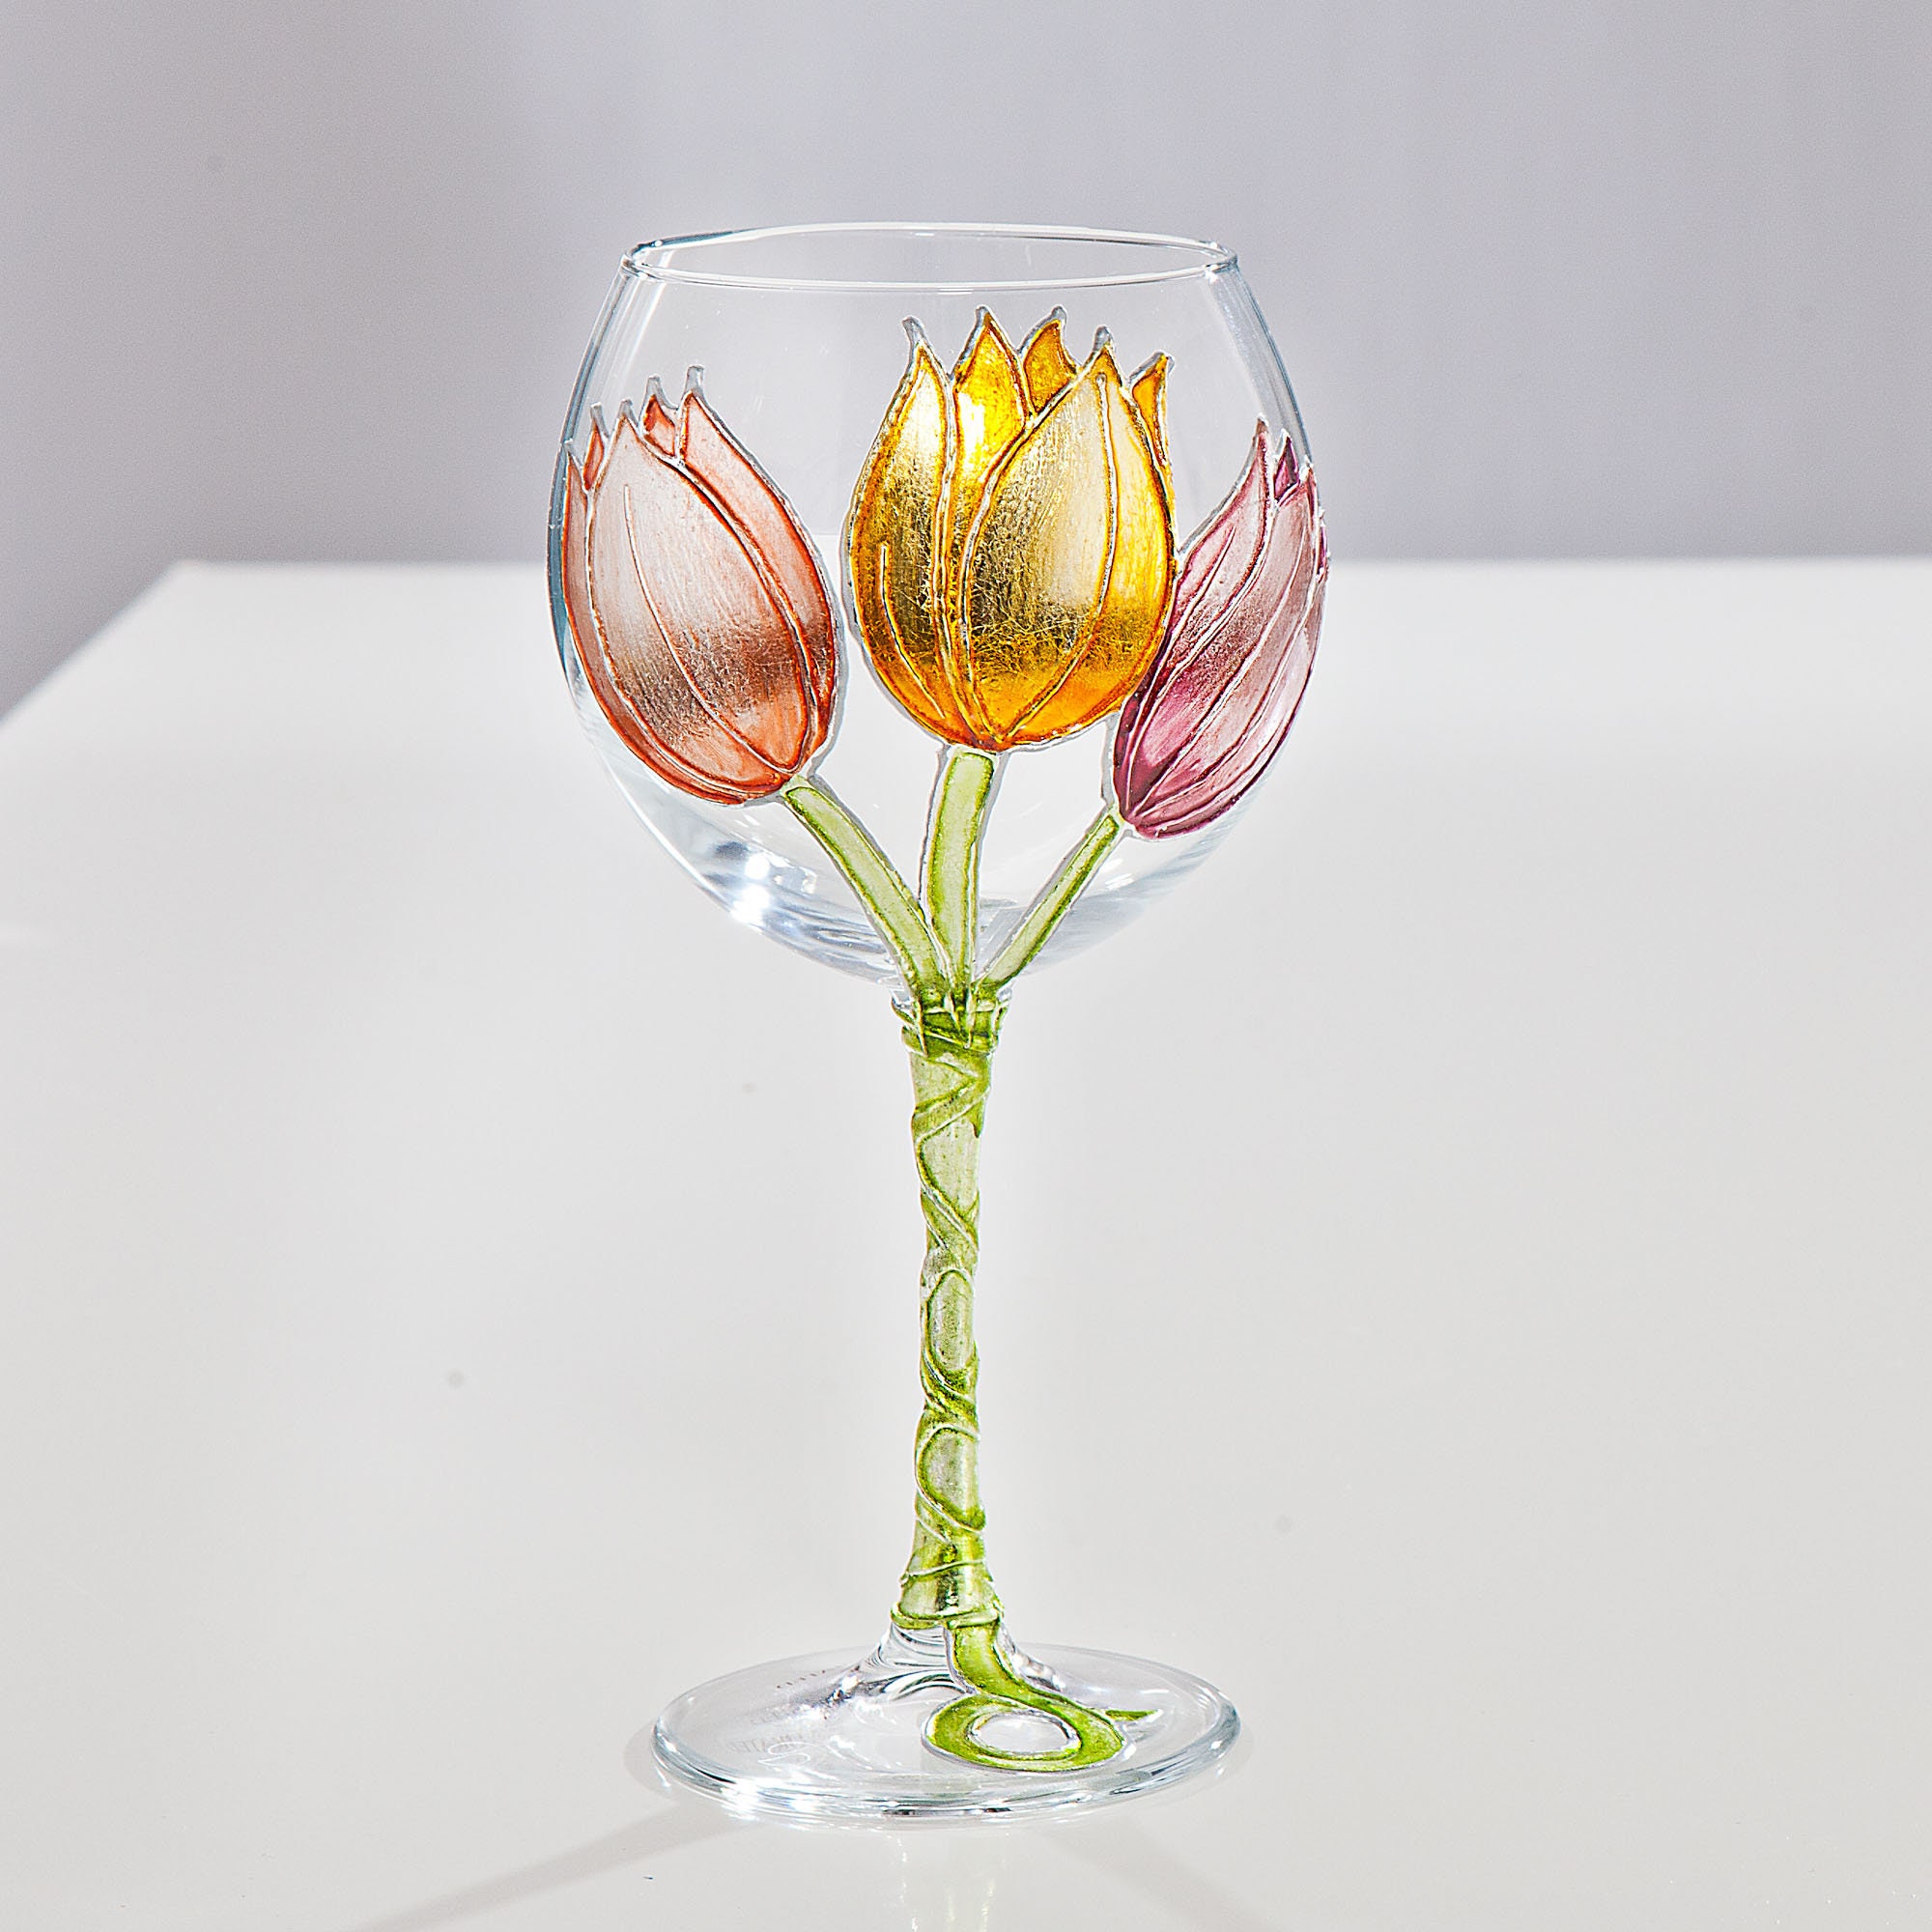 Discover Elegance: Tulipan Petal Wine Glasses in Stunning Pink and